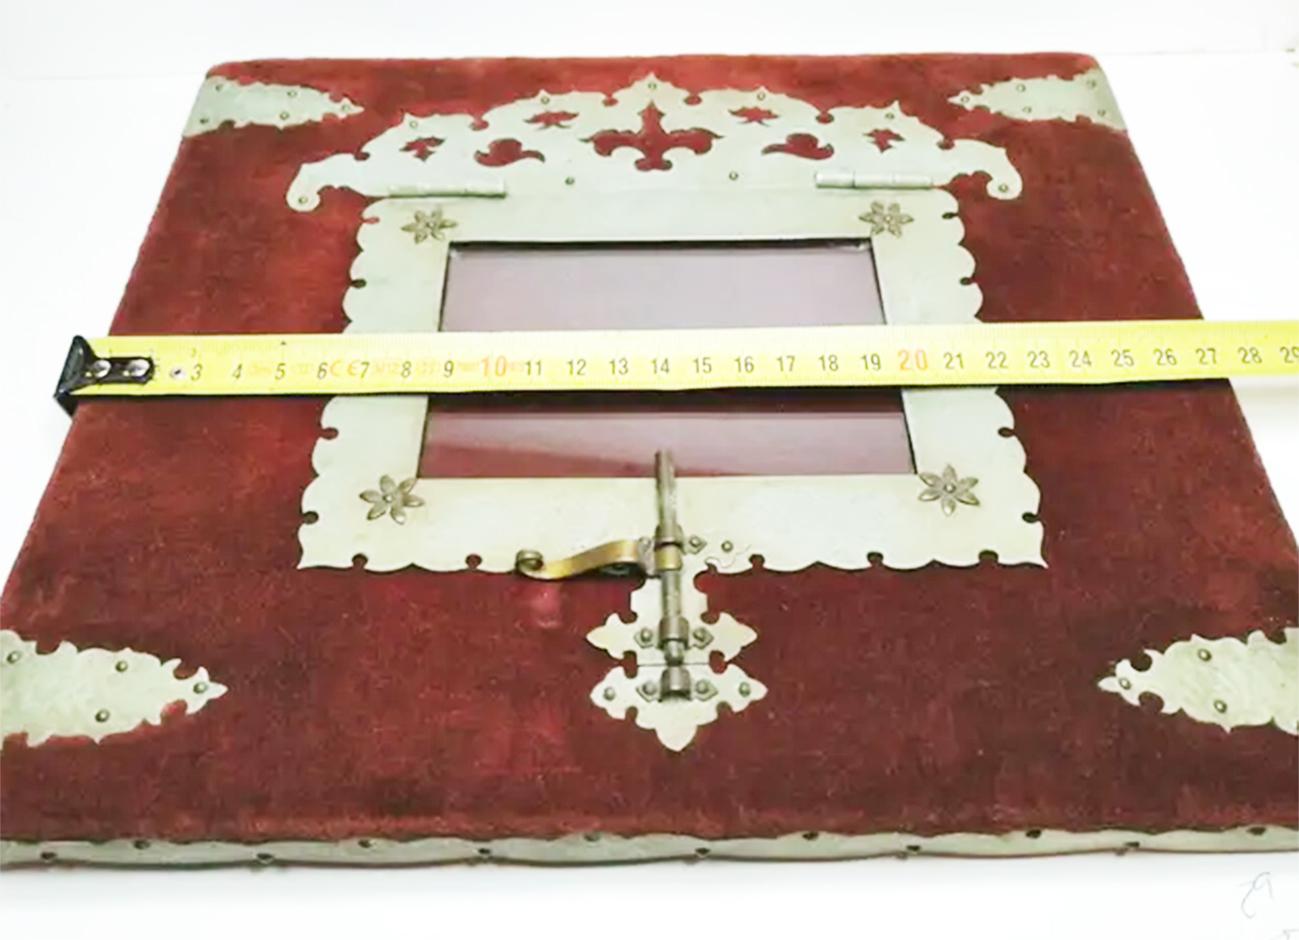 Antique frame  reliquary of embossed alpaca and velvet used to frame image or religious relic
comes from Andalucia, Spain

It is to hang on the wall and has a door with an iron where to place the object you want to introduce

It is a unique,